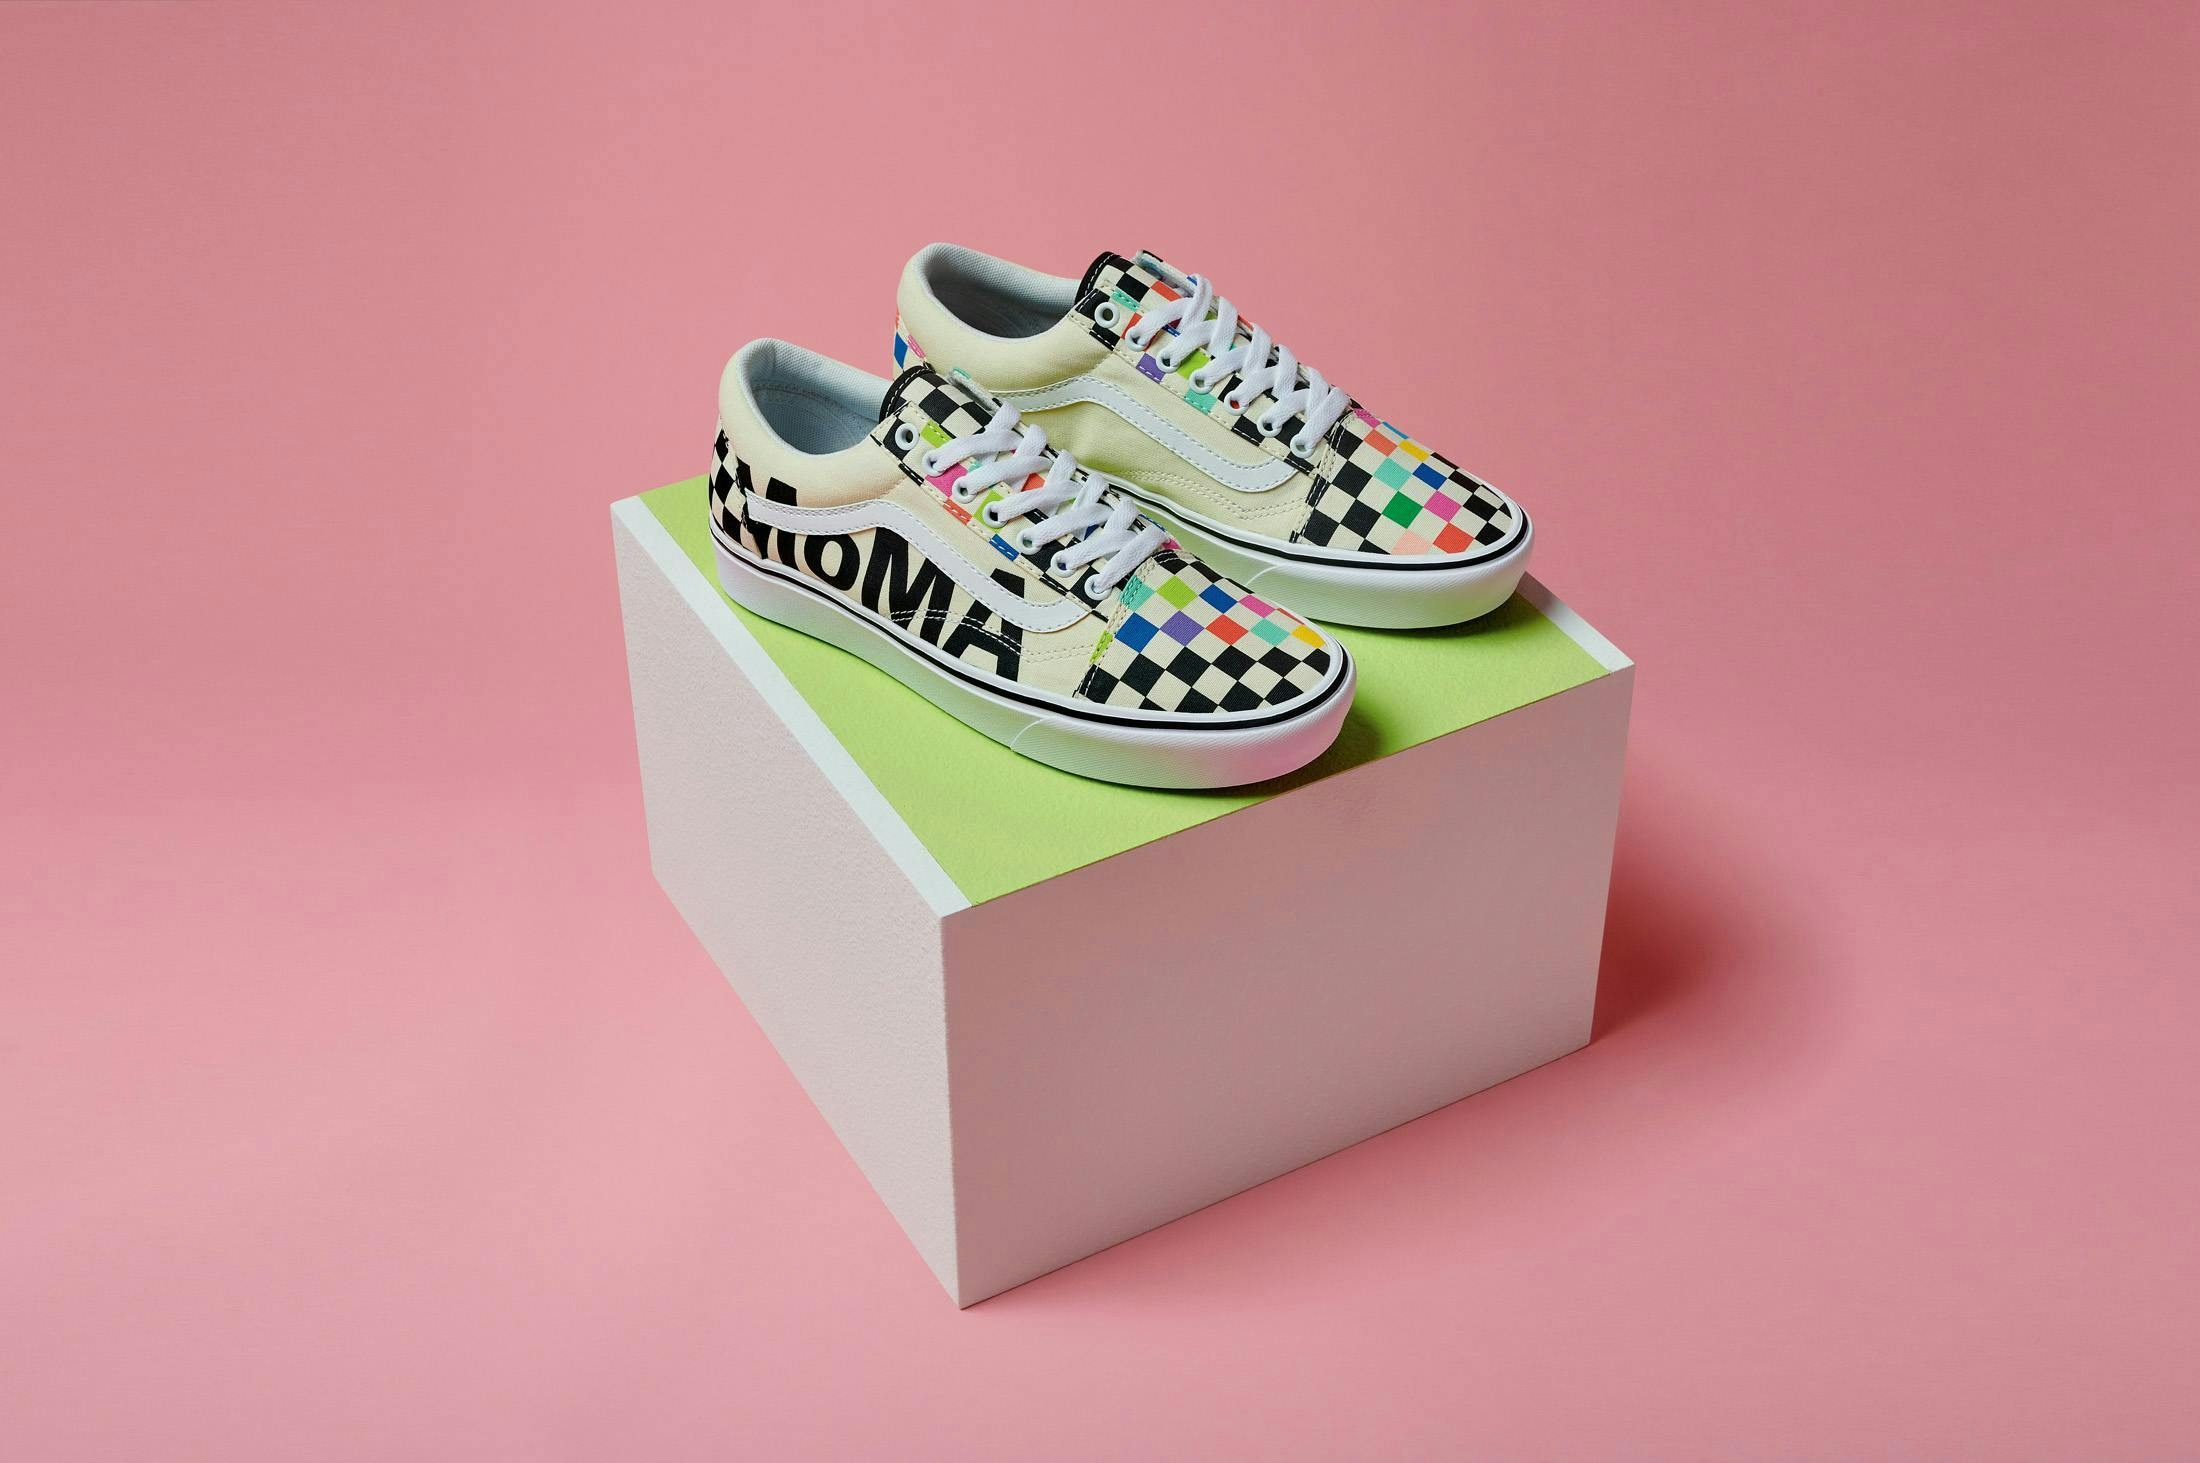 product studio aim photography holiday 20 holiday 2020 moma footwear classics unisex women's womens mens men's pair shoe clothing apparel sneaker canvas box